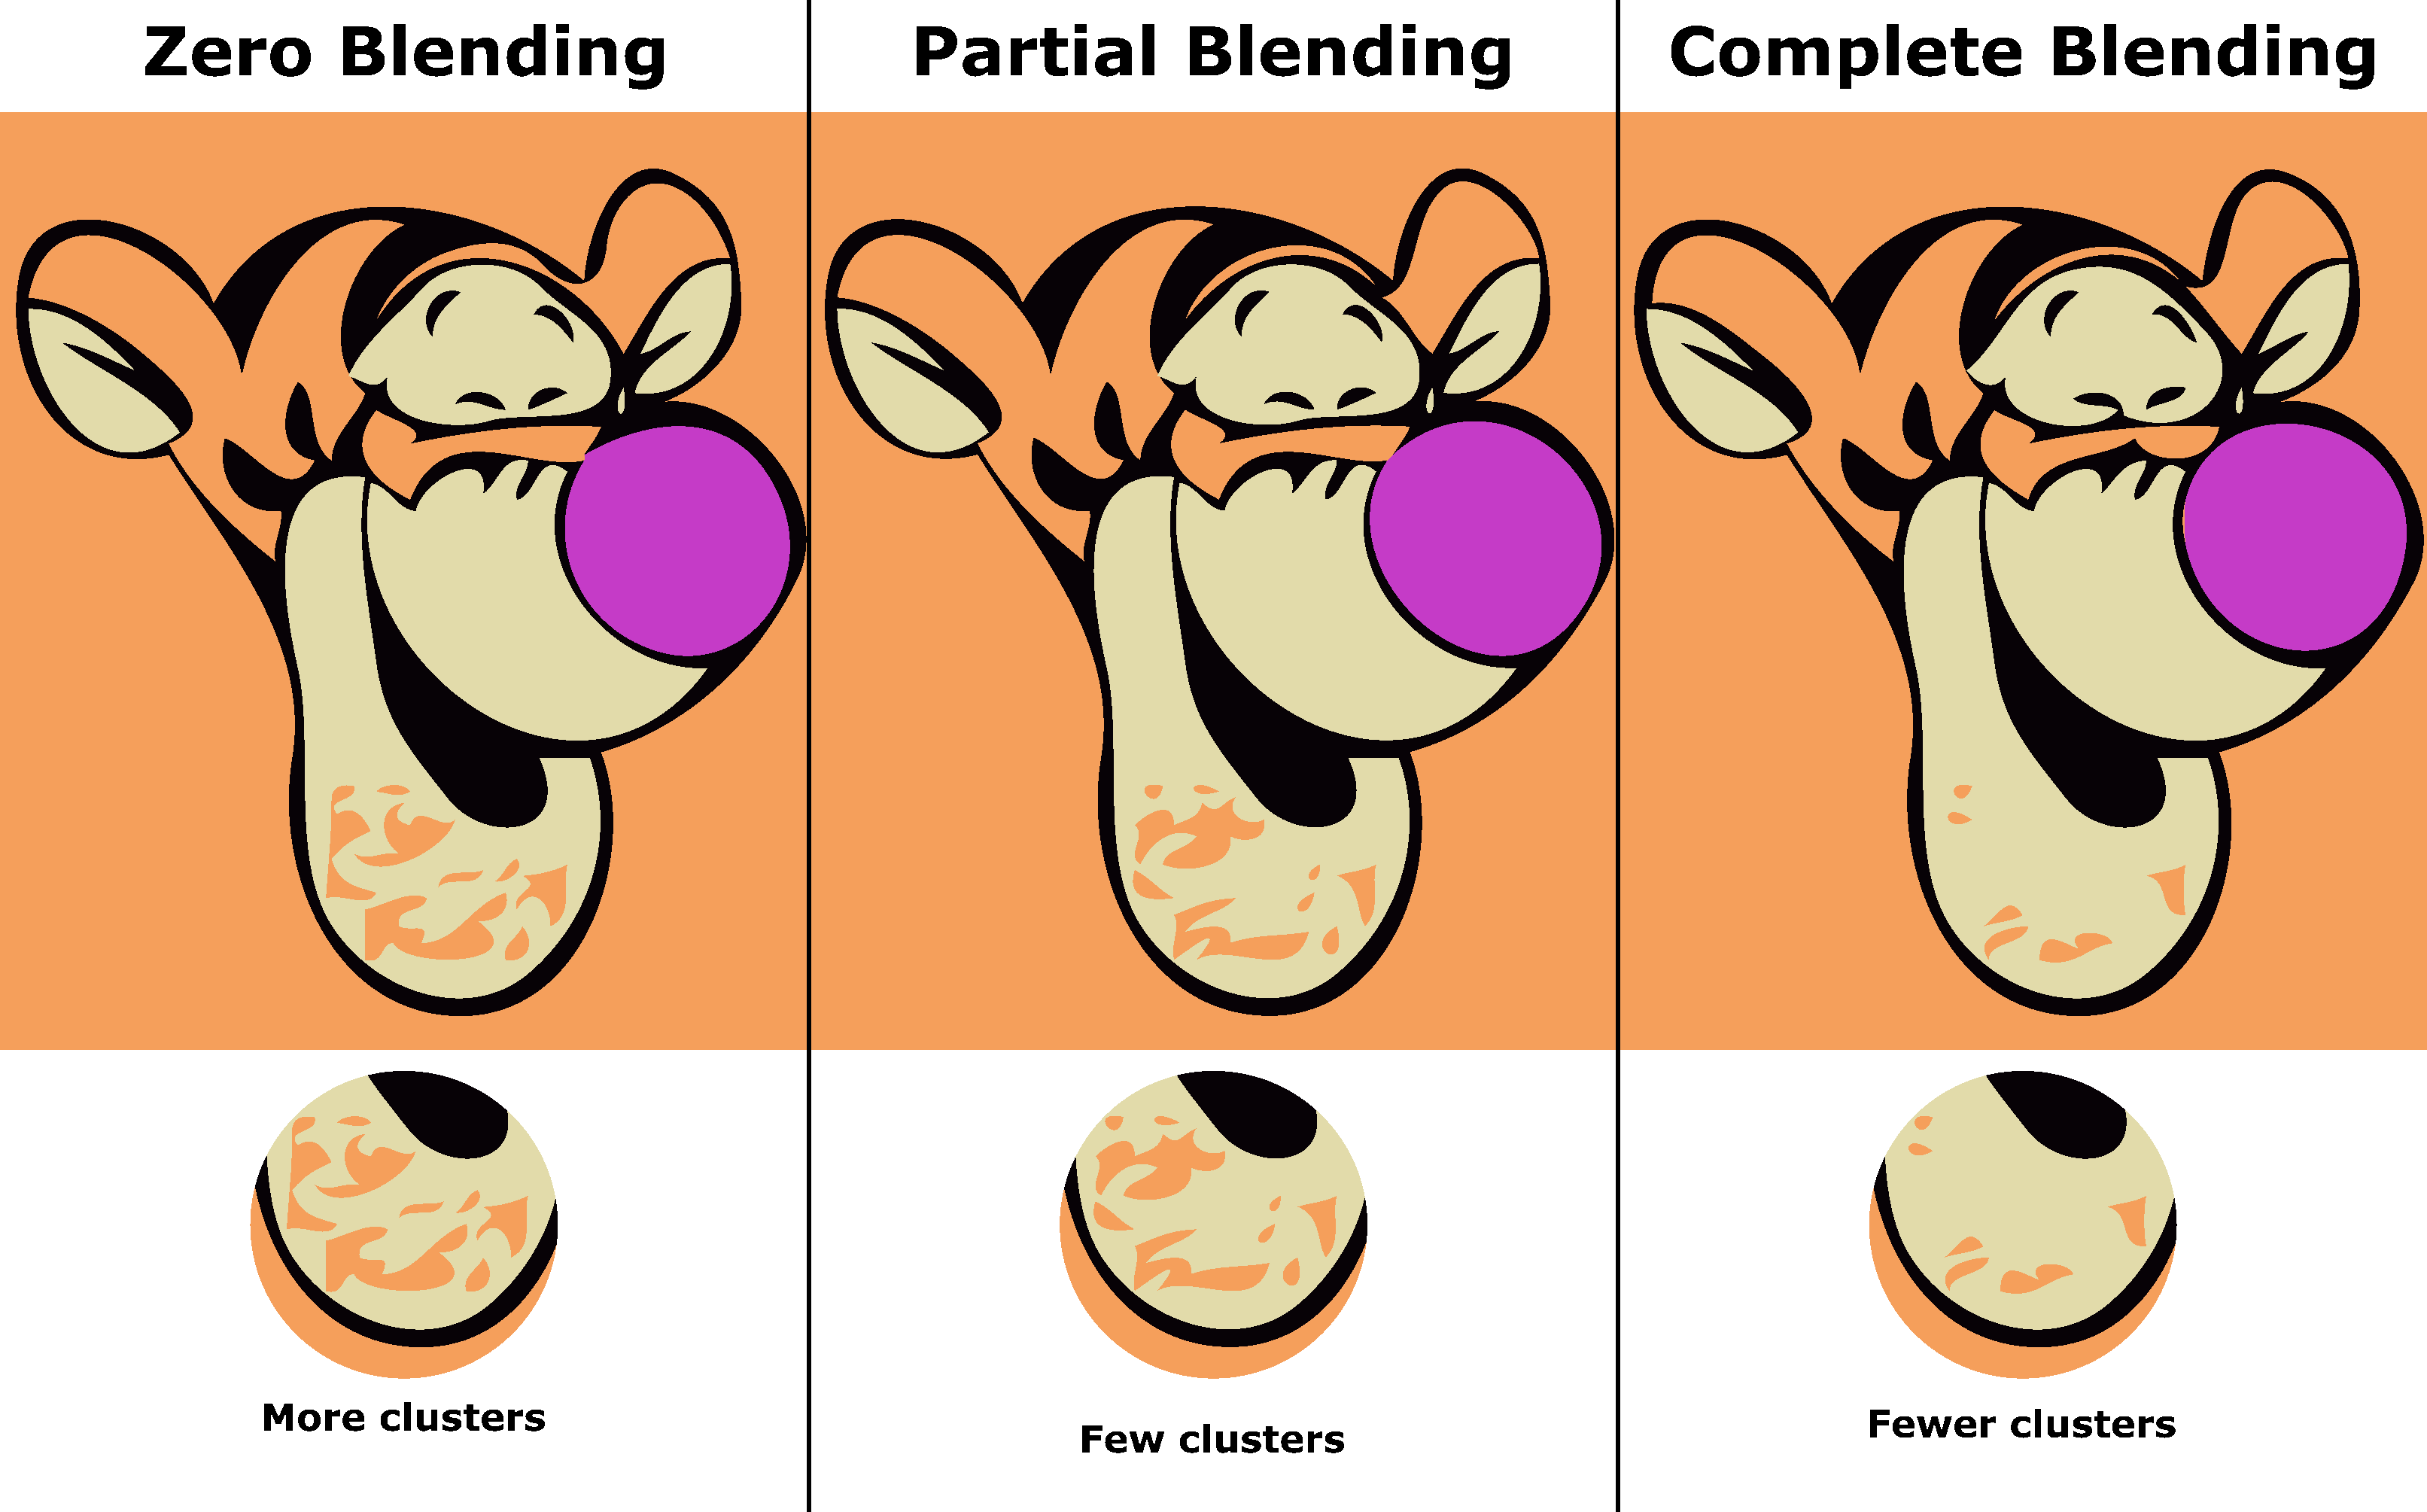 Blending reduces noise converting png to svg